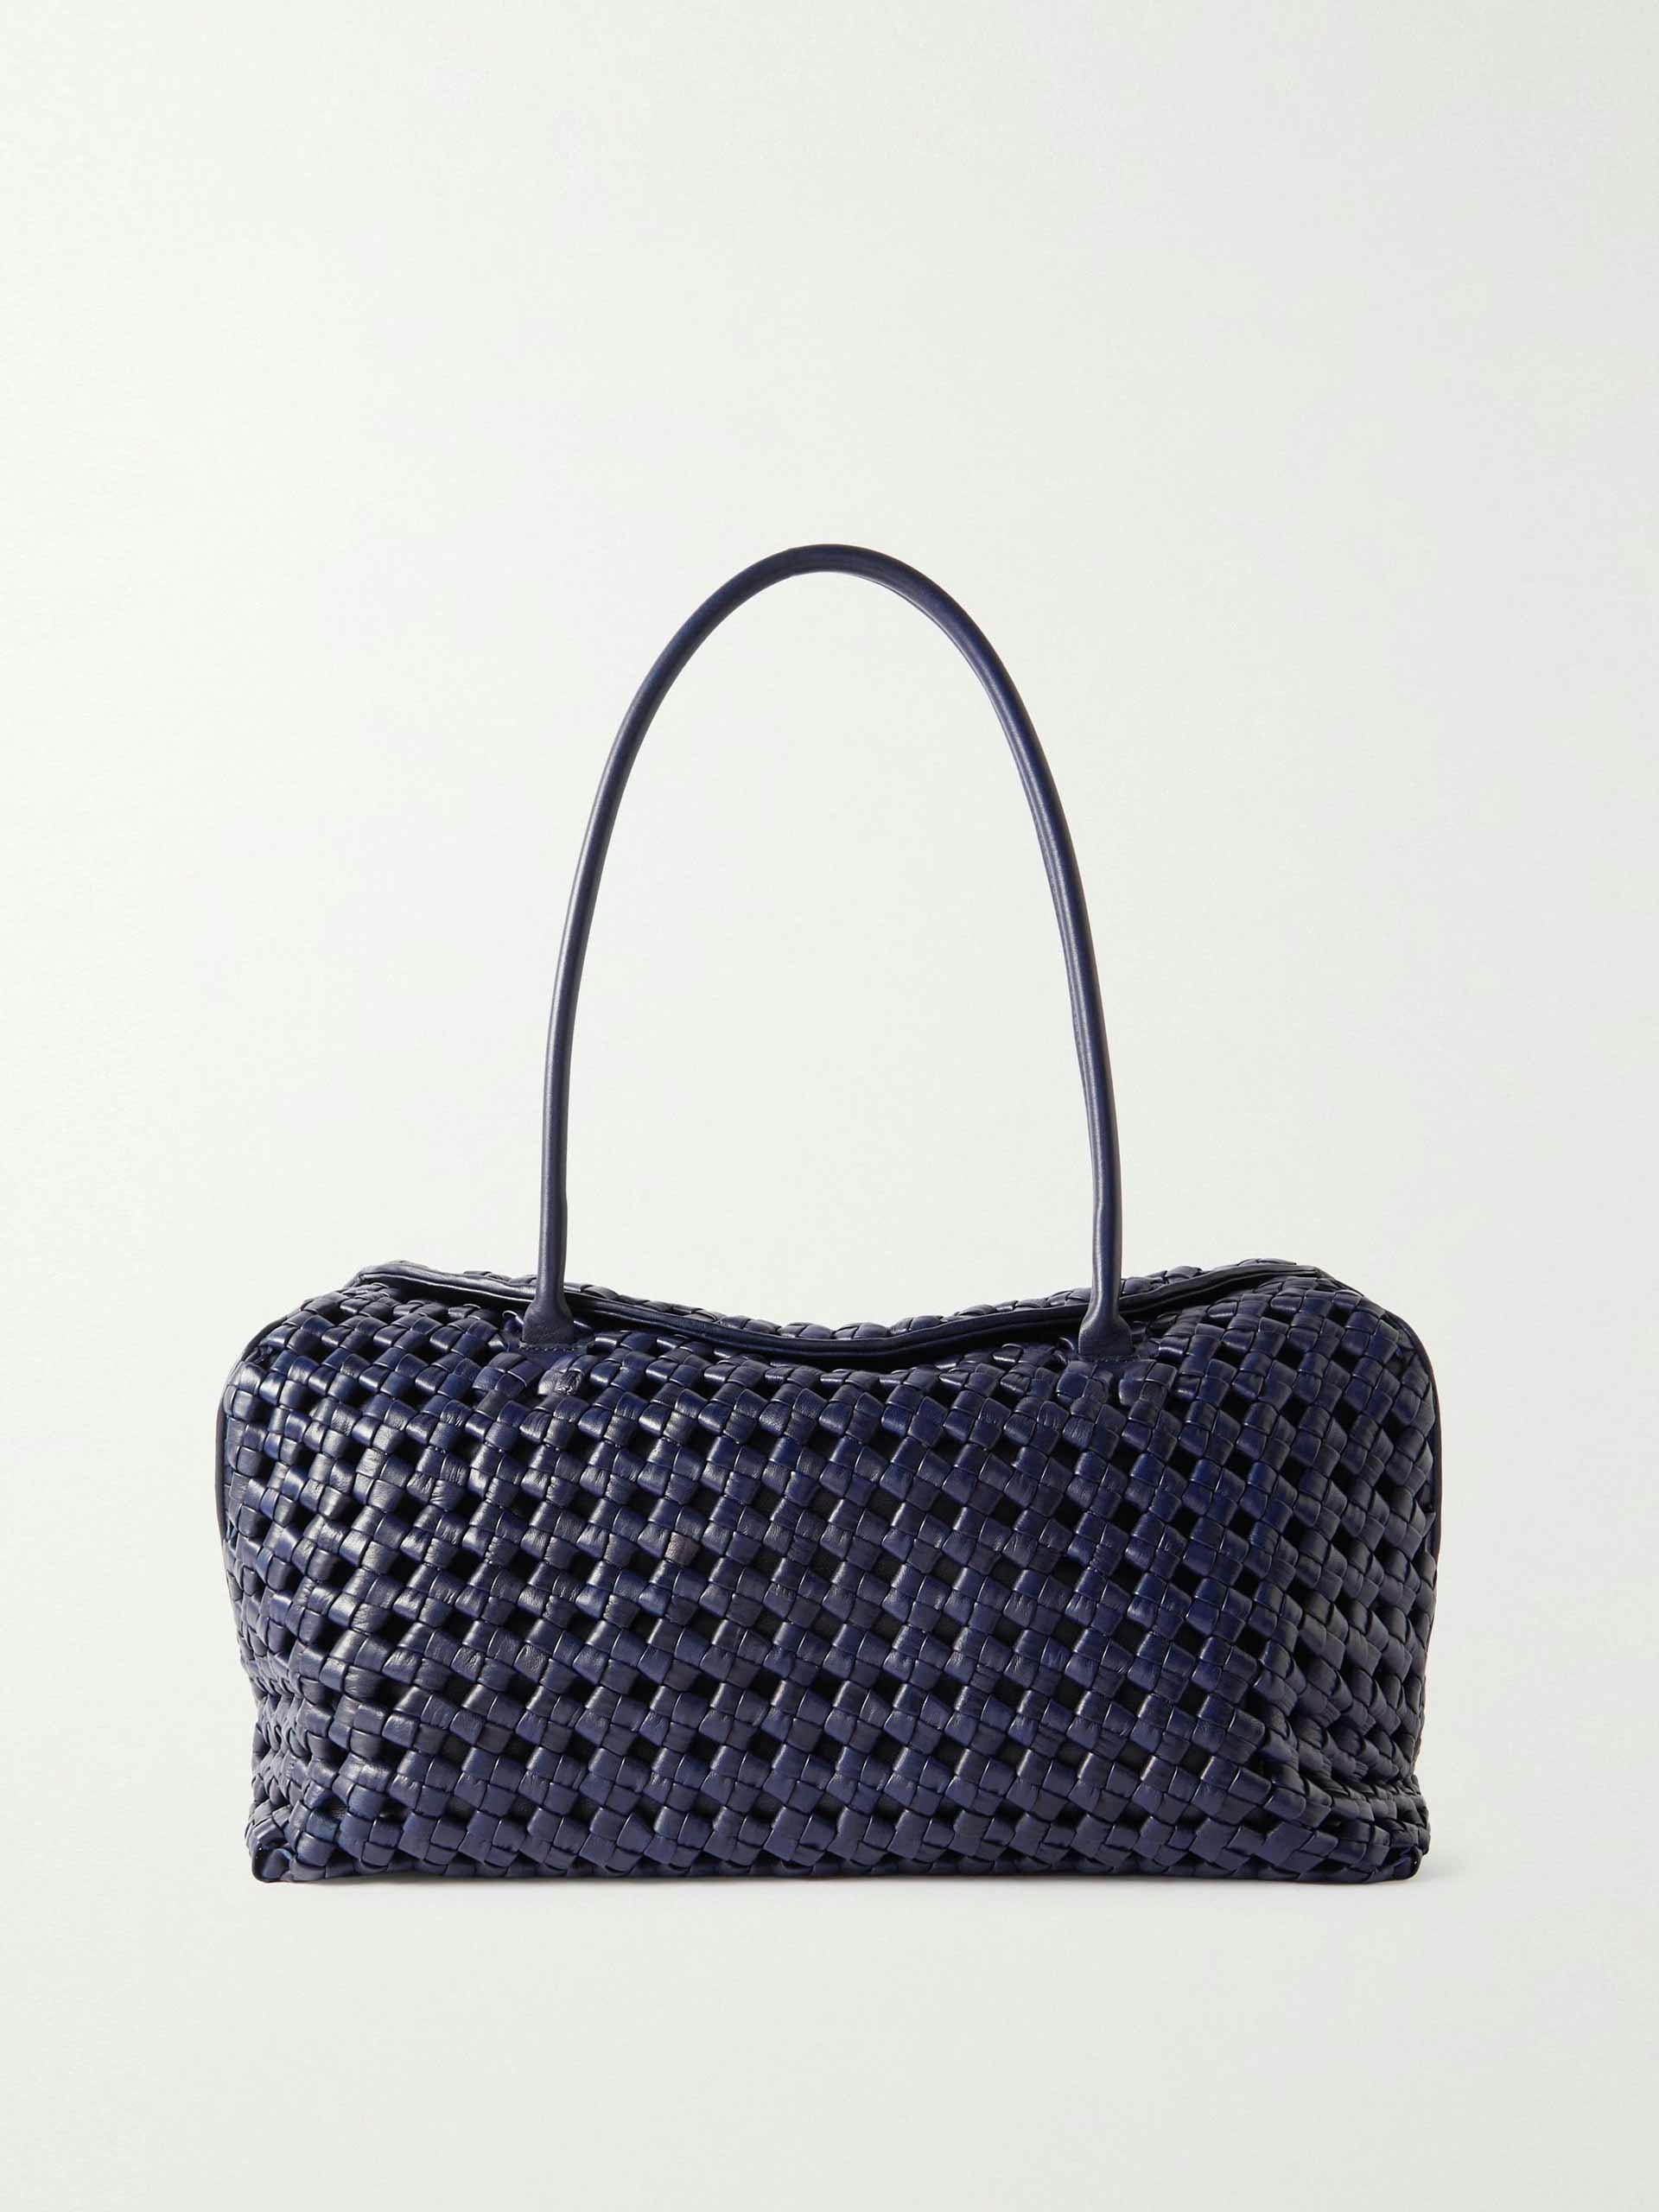 Navy woven leather tote bag